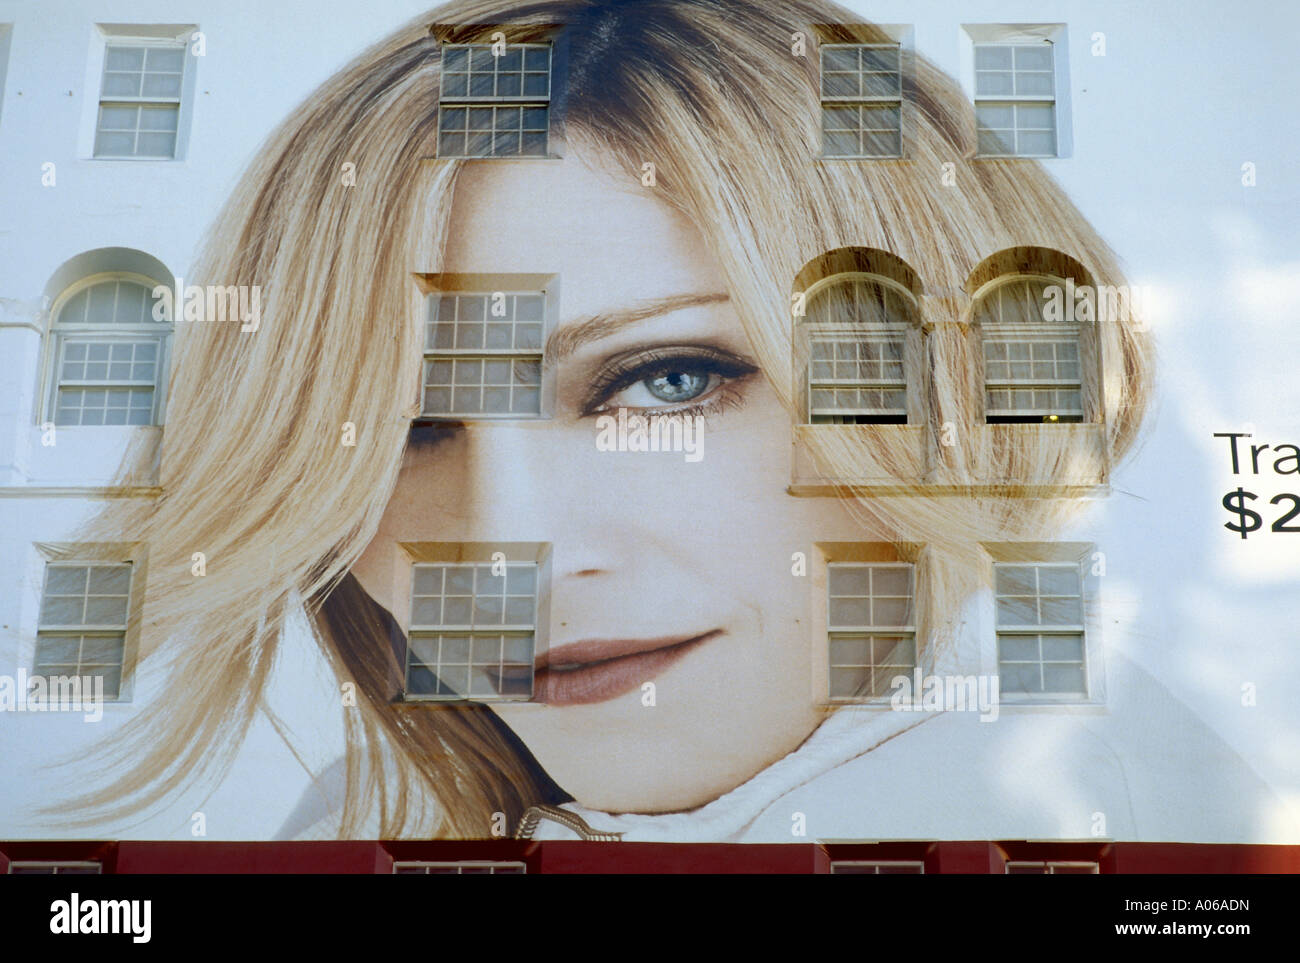 Promotional mural featuring famous pop singer Madonna announcing store opening of Swedish clothing store chain Hennes & Mauritz Stock Photo